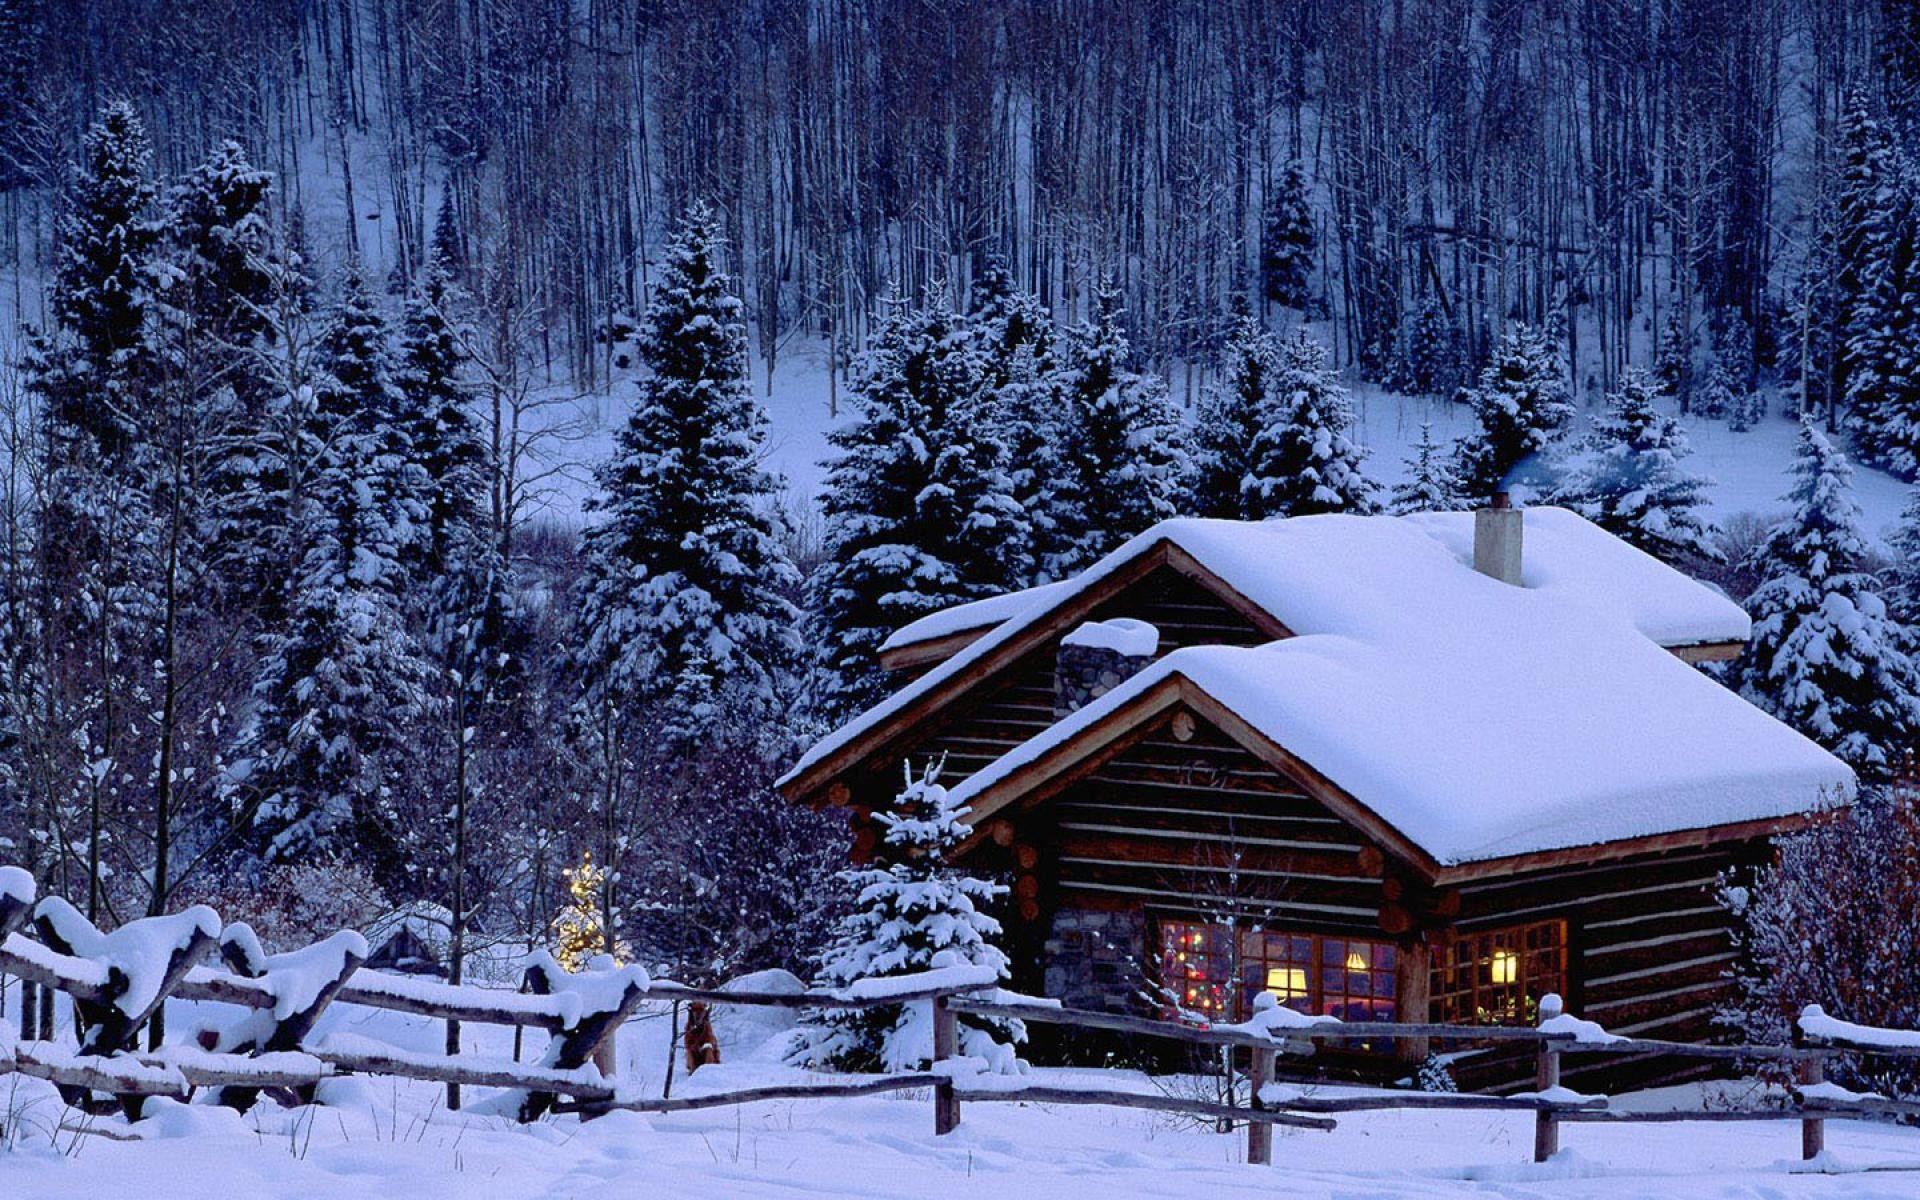 Snowy Christmas Scenes Wallpaper 48 images